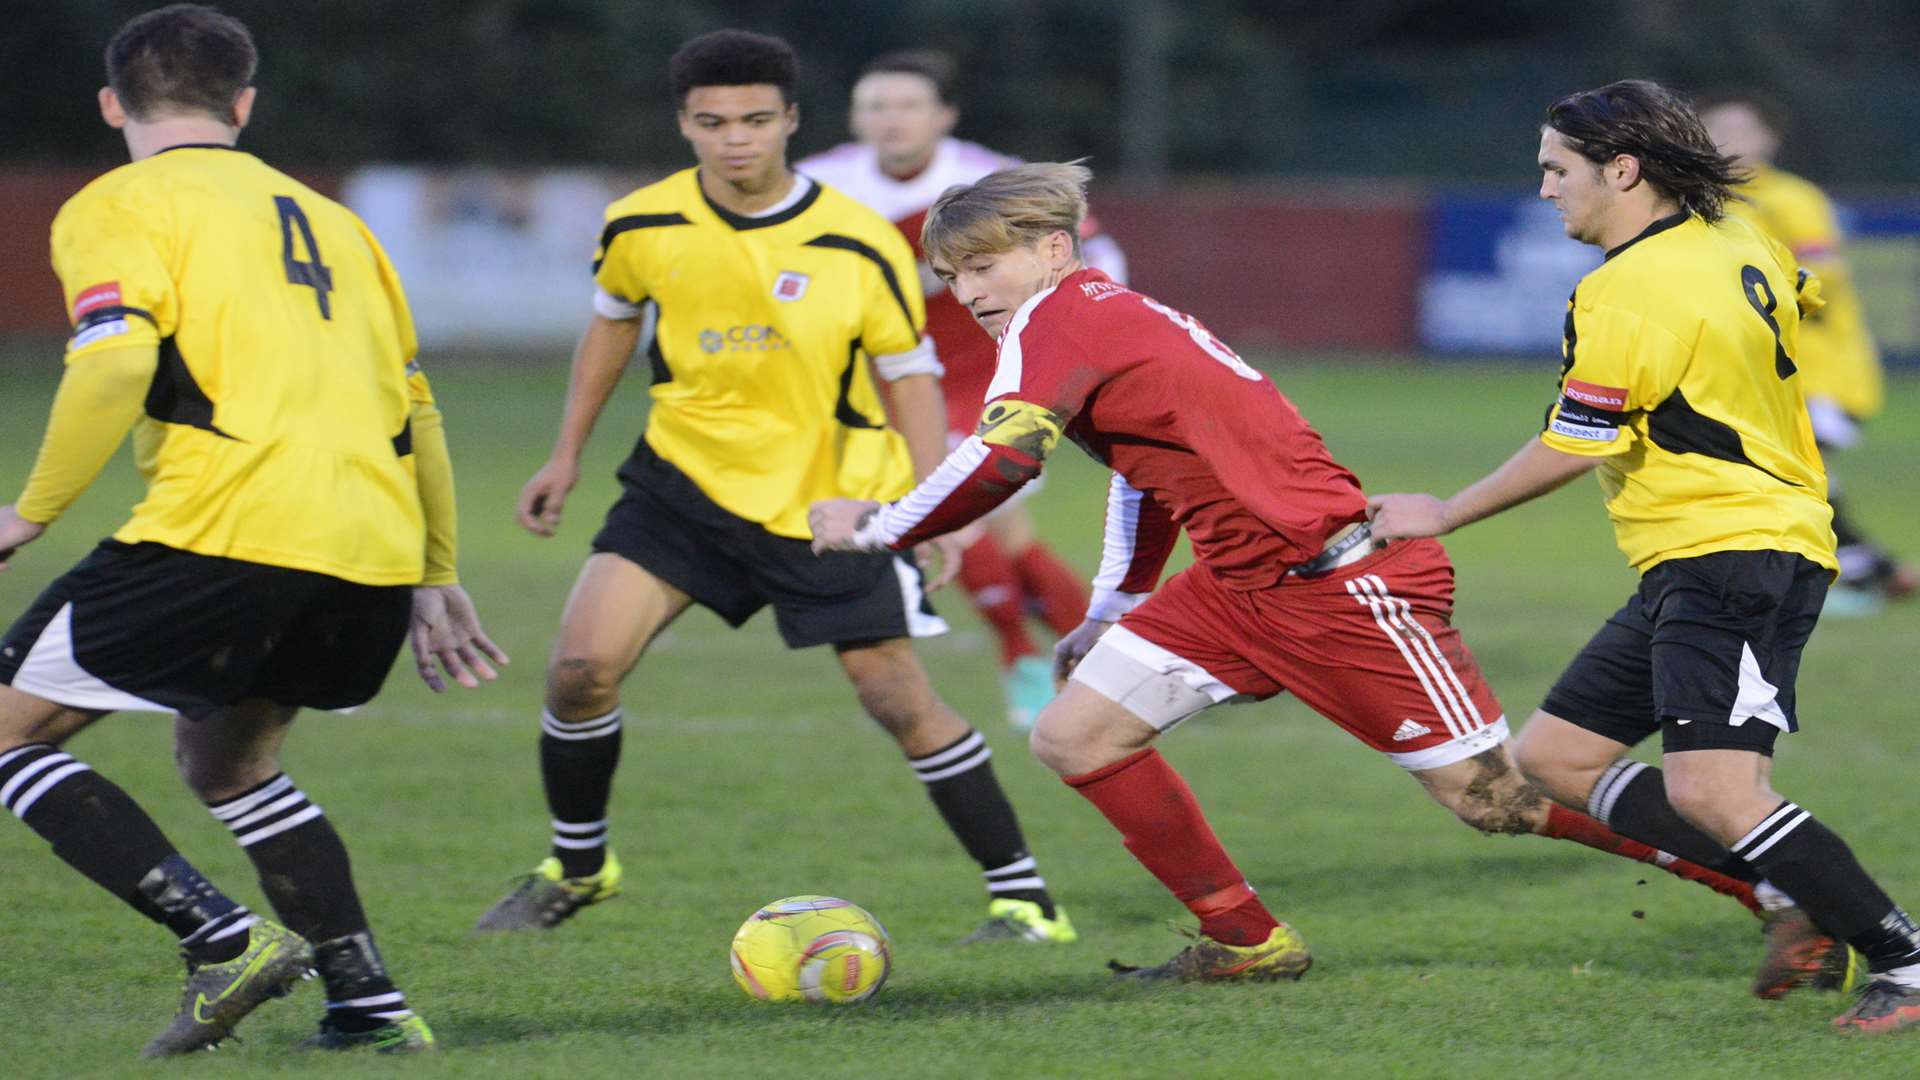 Hythe captain James Morrish takes on three Faversham players Picture: Gary Browne